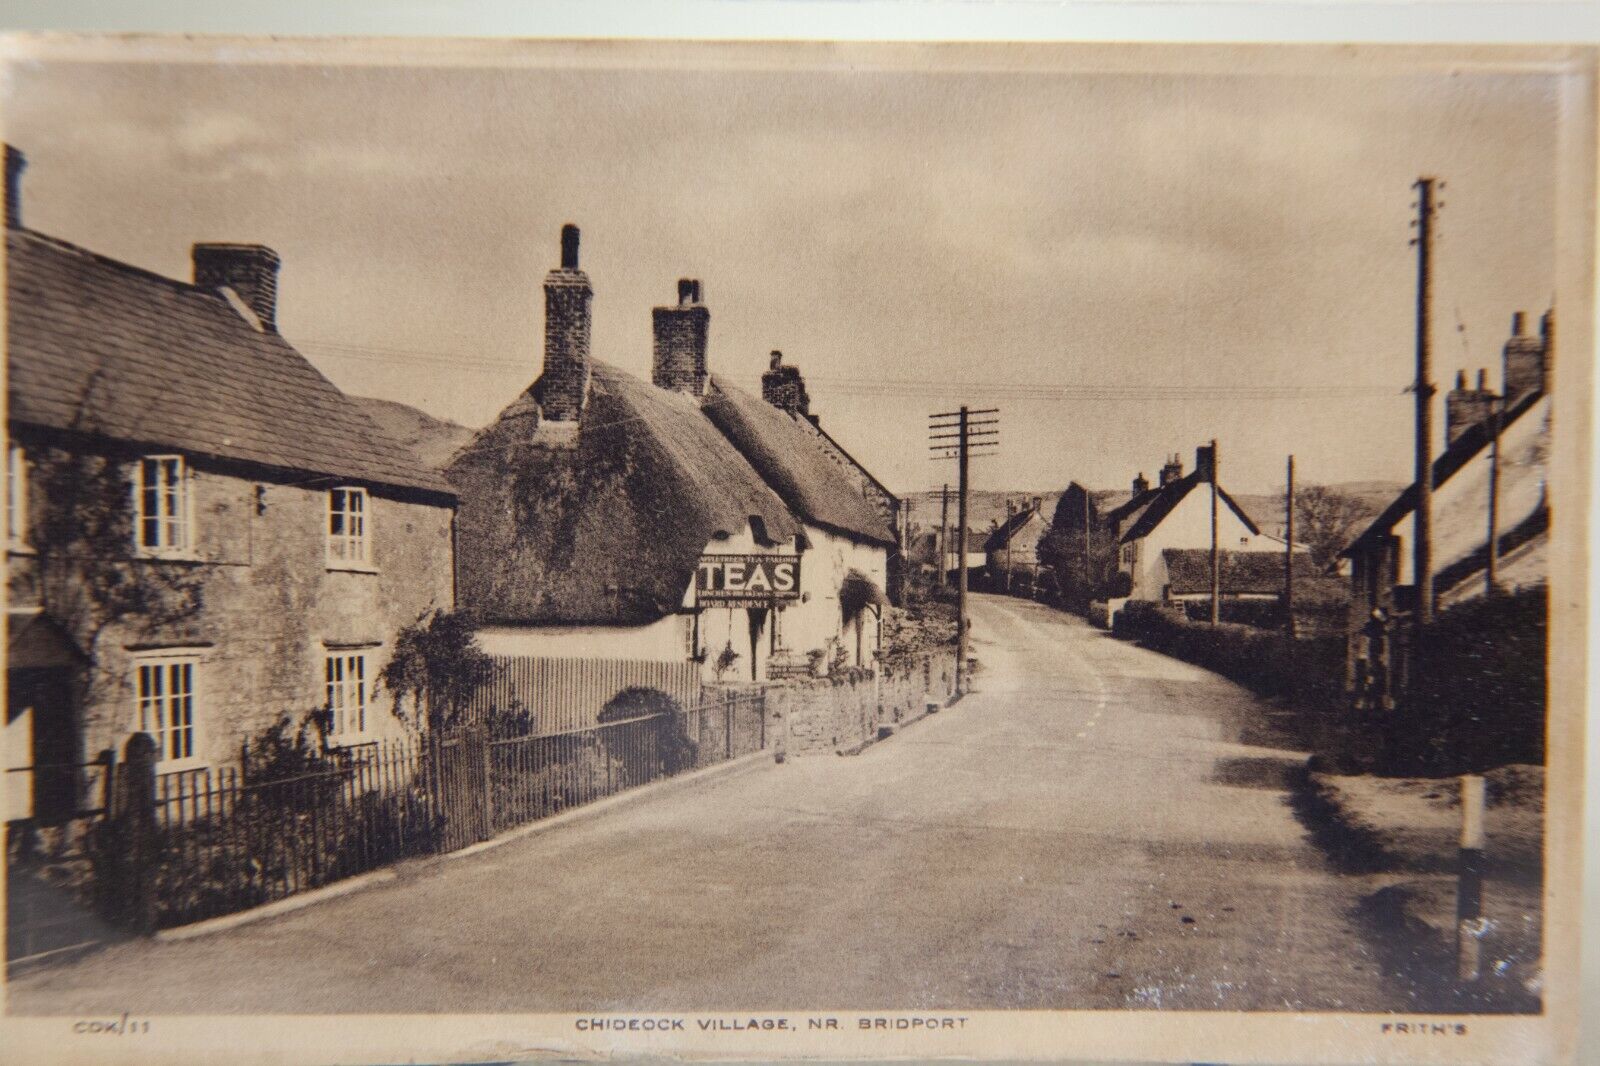 Early 1900's Chideock Village Nr Bridport - Frith's Series Postcard Unposted